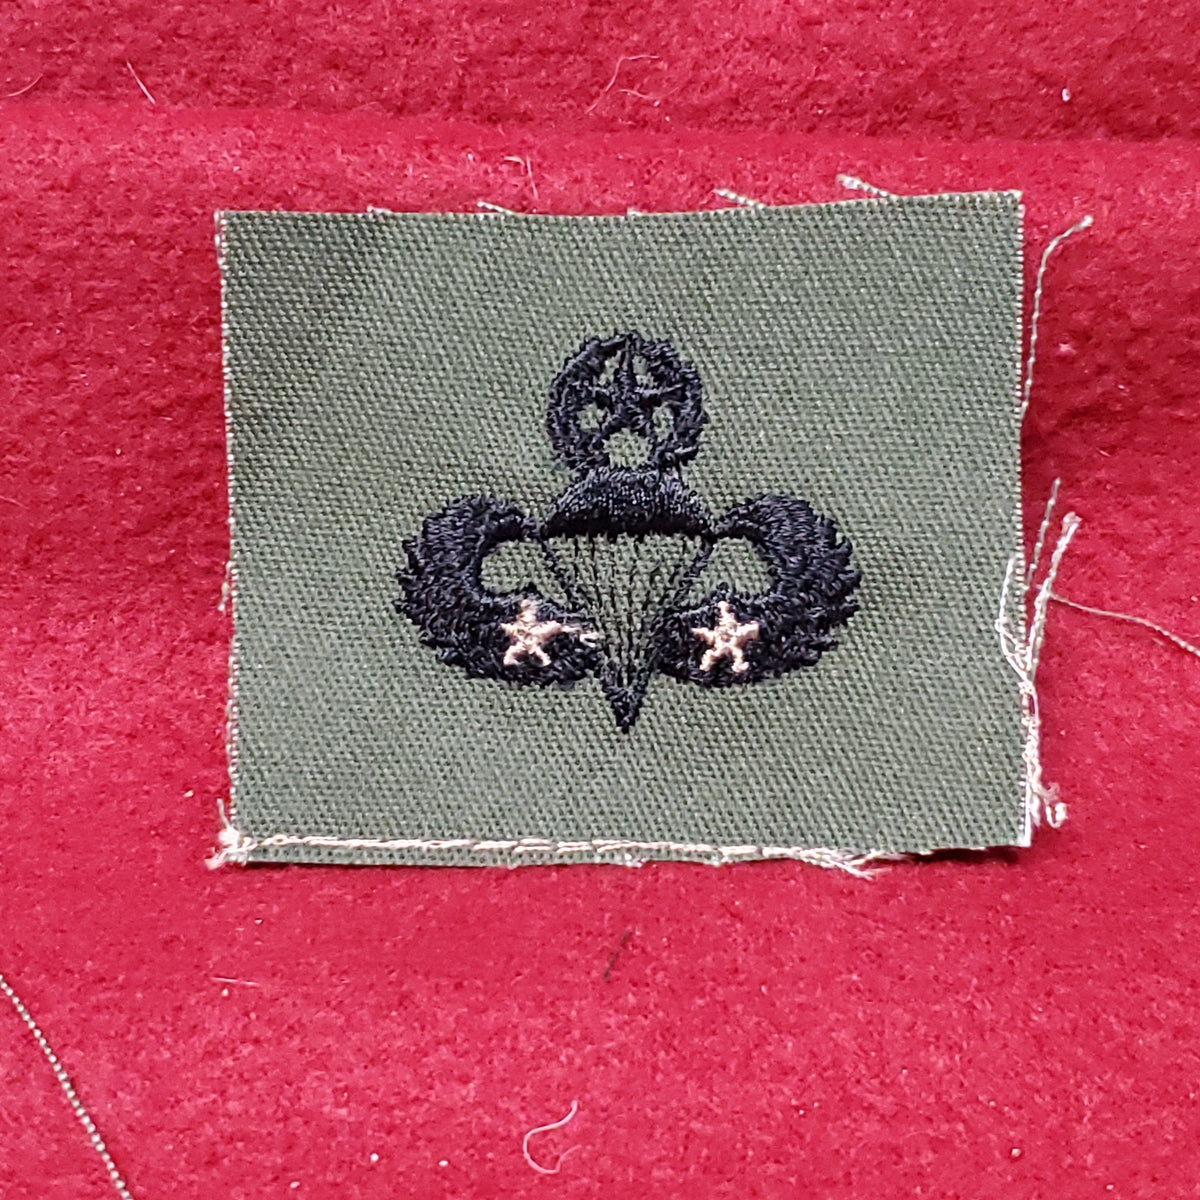 US Army BASIC EXPERT MARKSMANSHIP QUALIFICATION Subdued Badge Pins (25 –  Gibsons Tactical Tavern